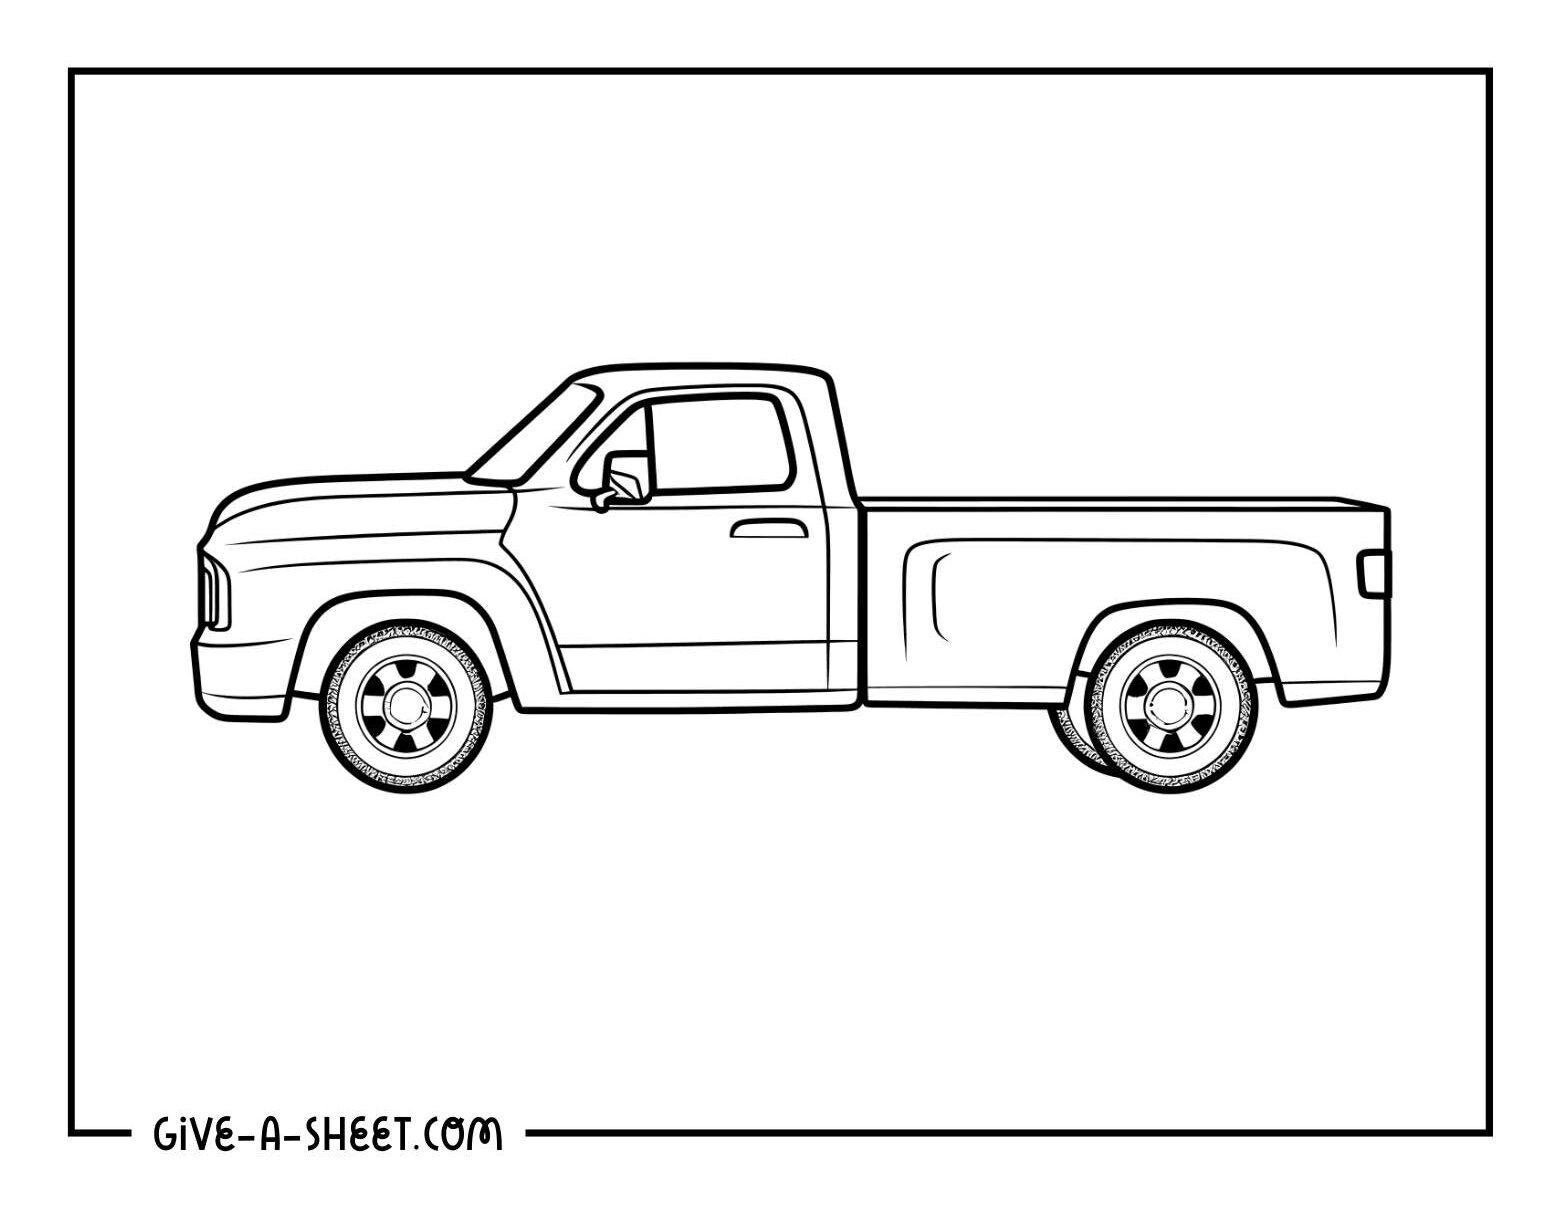 Simple pickup truck coloring page for kids.